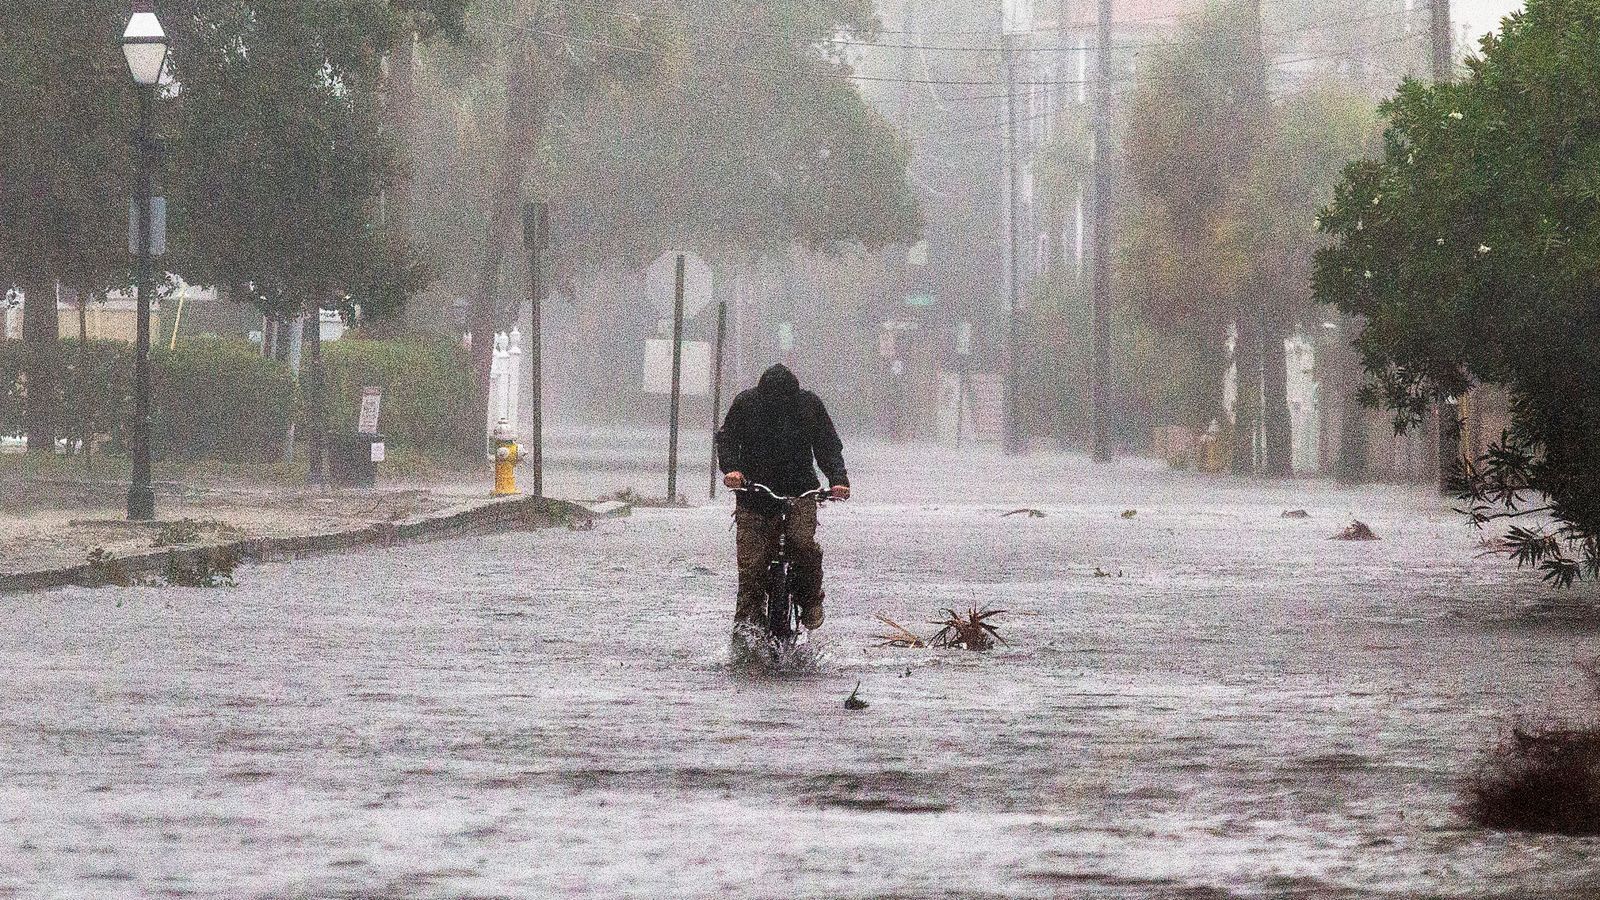 Hurricane Ian has killed at least 17 people in the US - and officials are warning number of deaths will rise